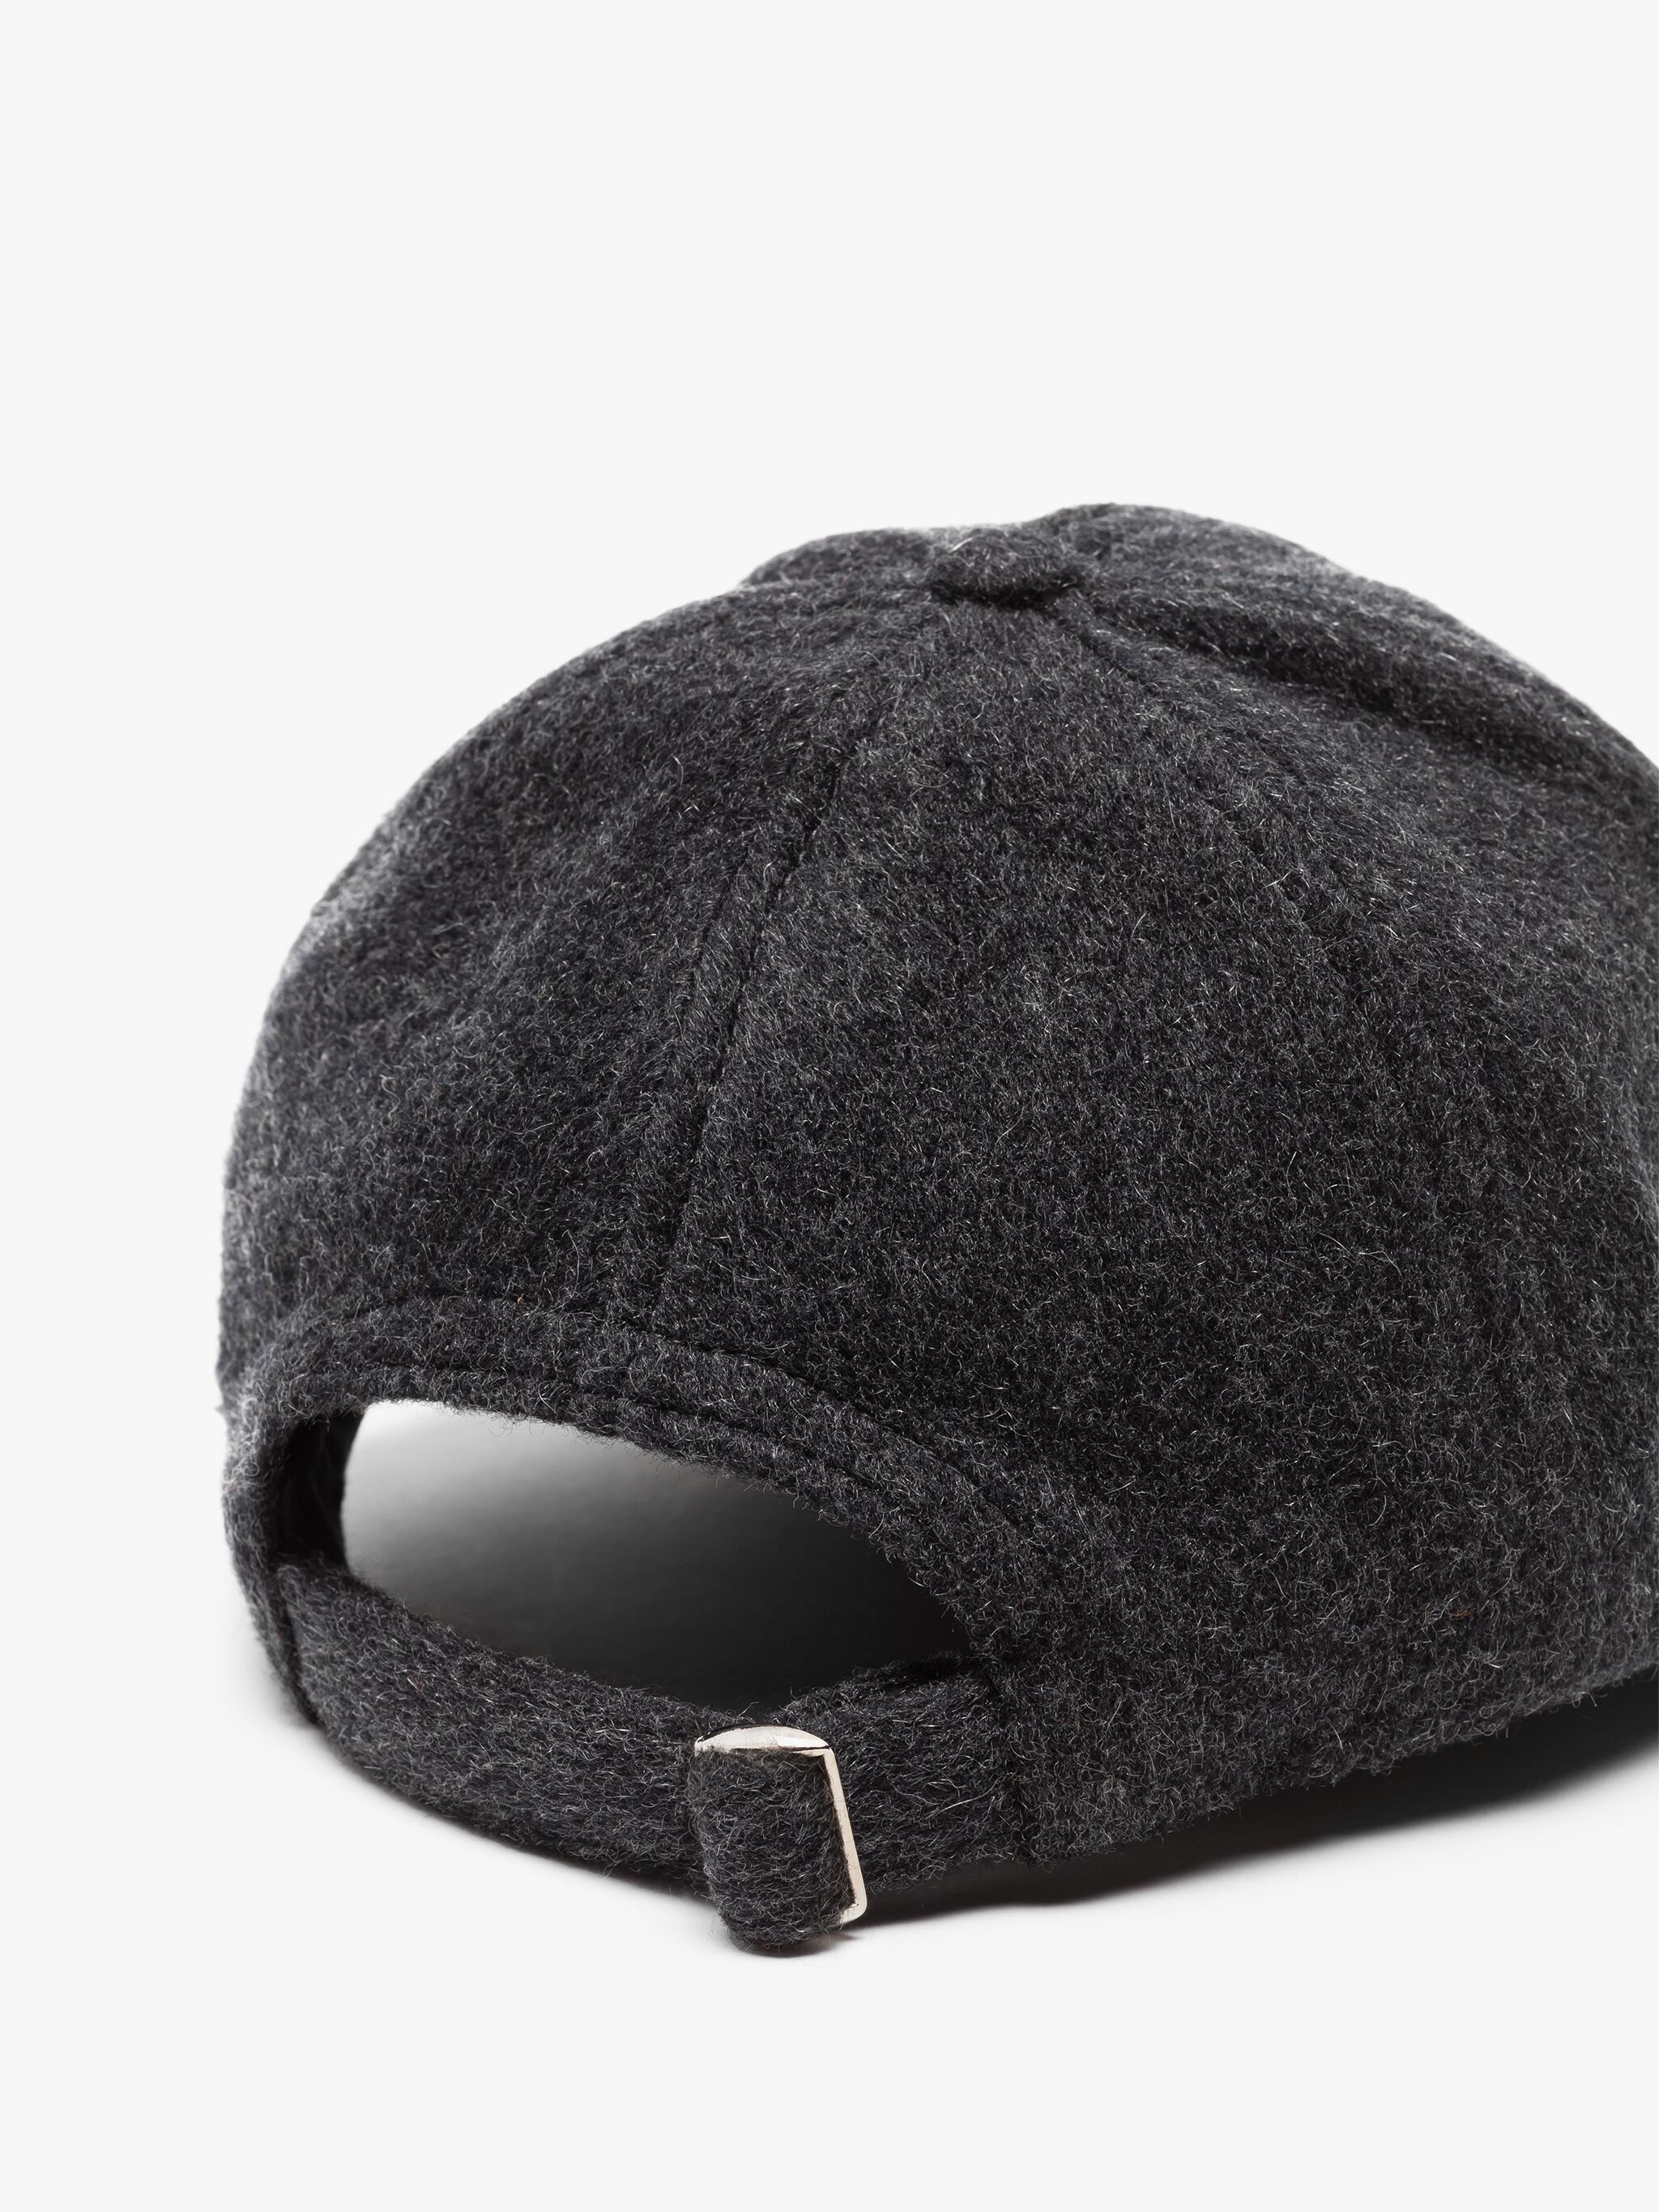 TIPPING CHARCOAL WOOL & CASHMERE BASEBALL CAP - 3